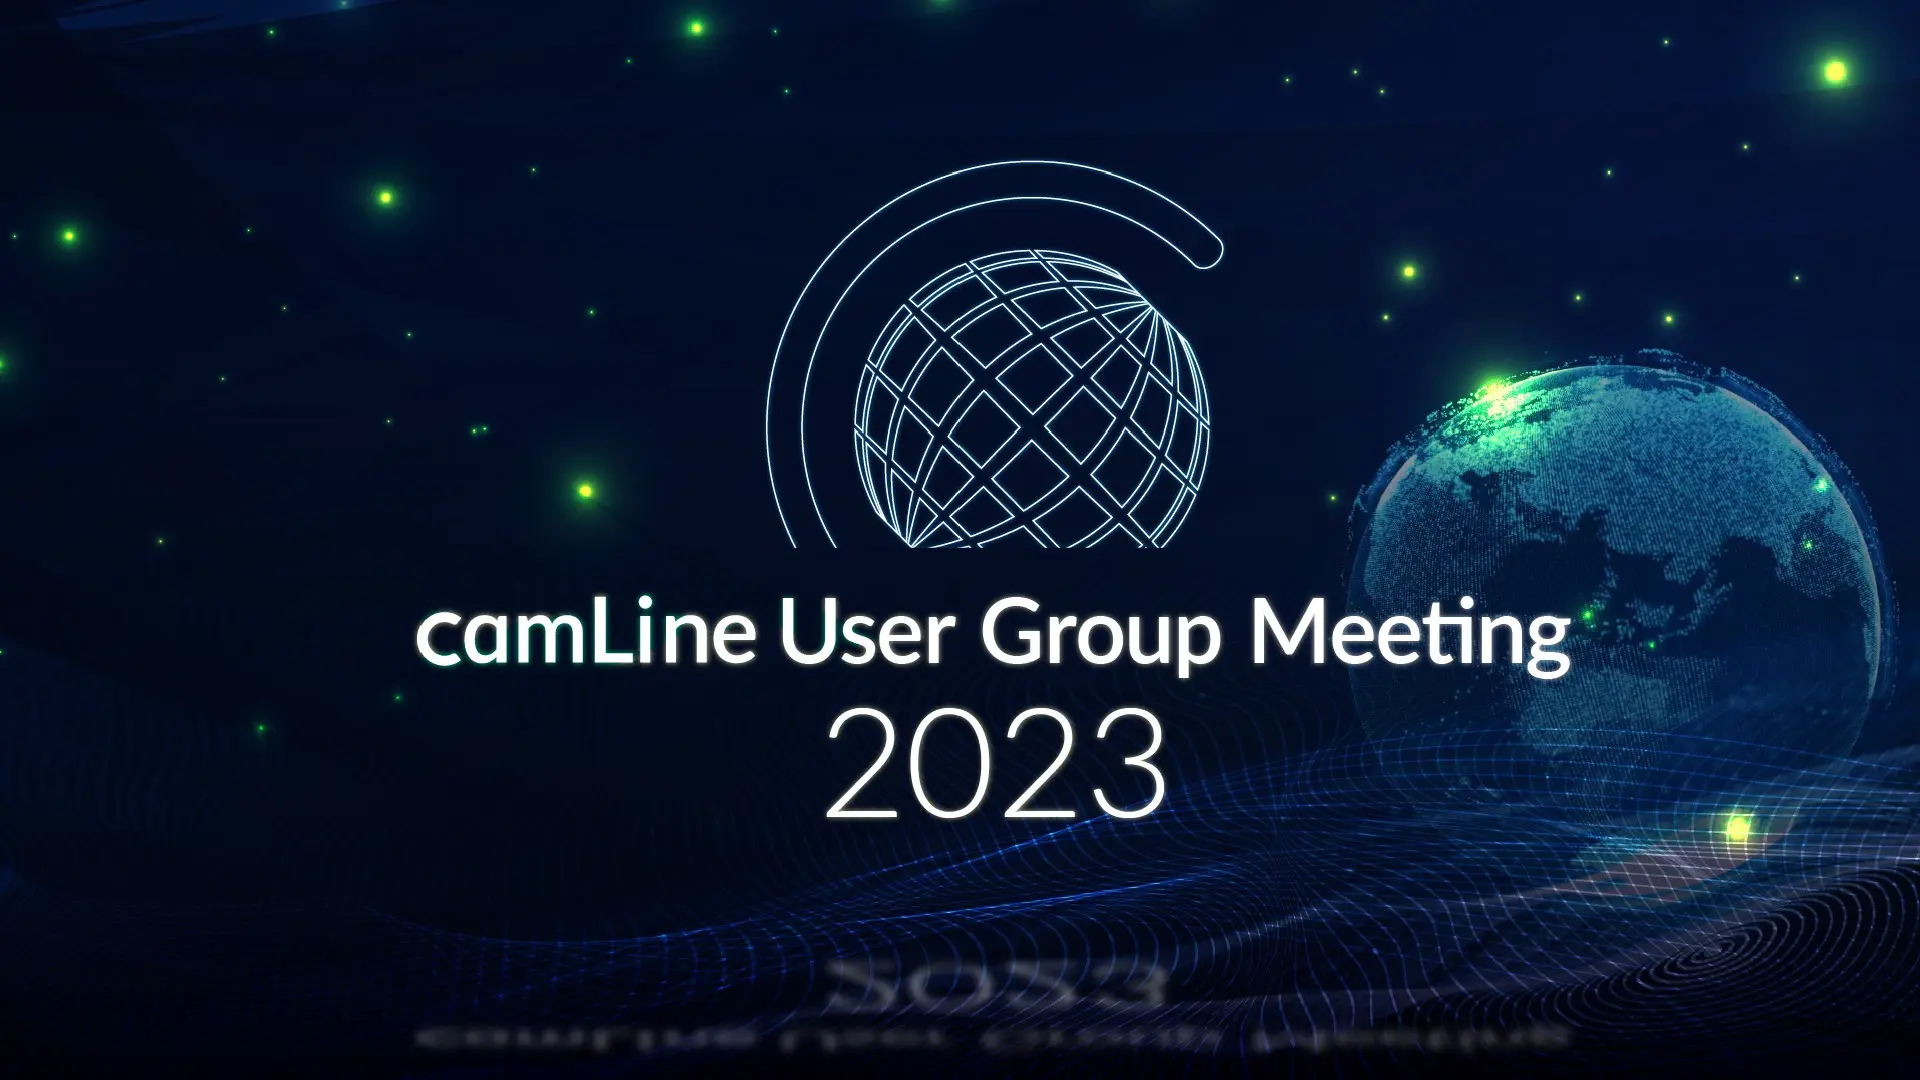 camLine User Group Meeting 2023 event banner